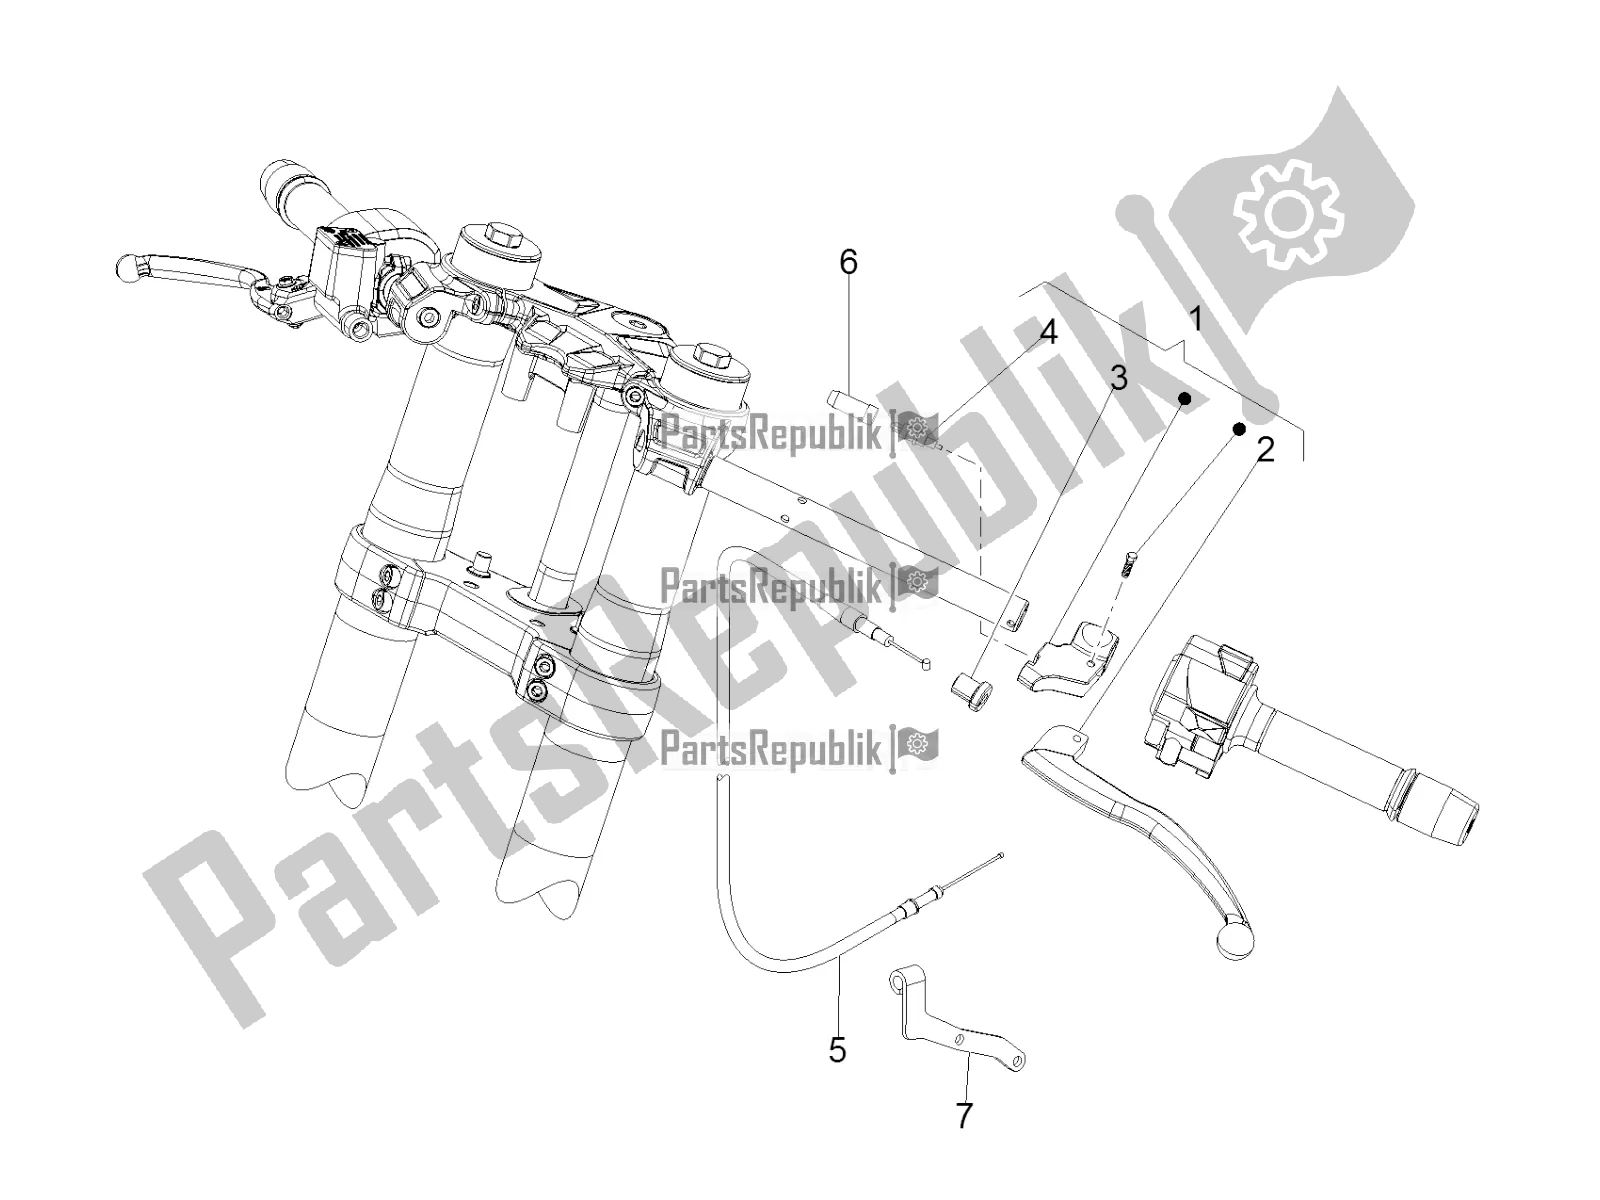 All parts for the Clutch Control of the Aprilia RS 125 4T ABS Replica 2019